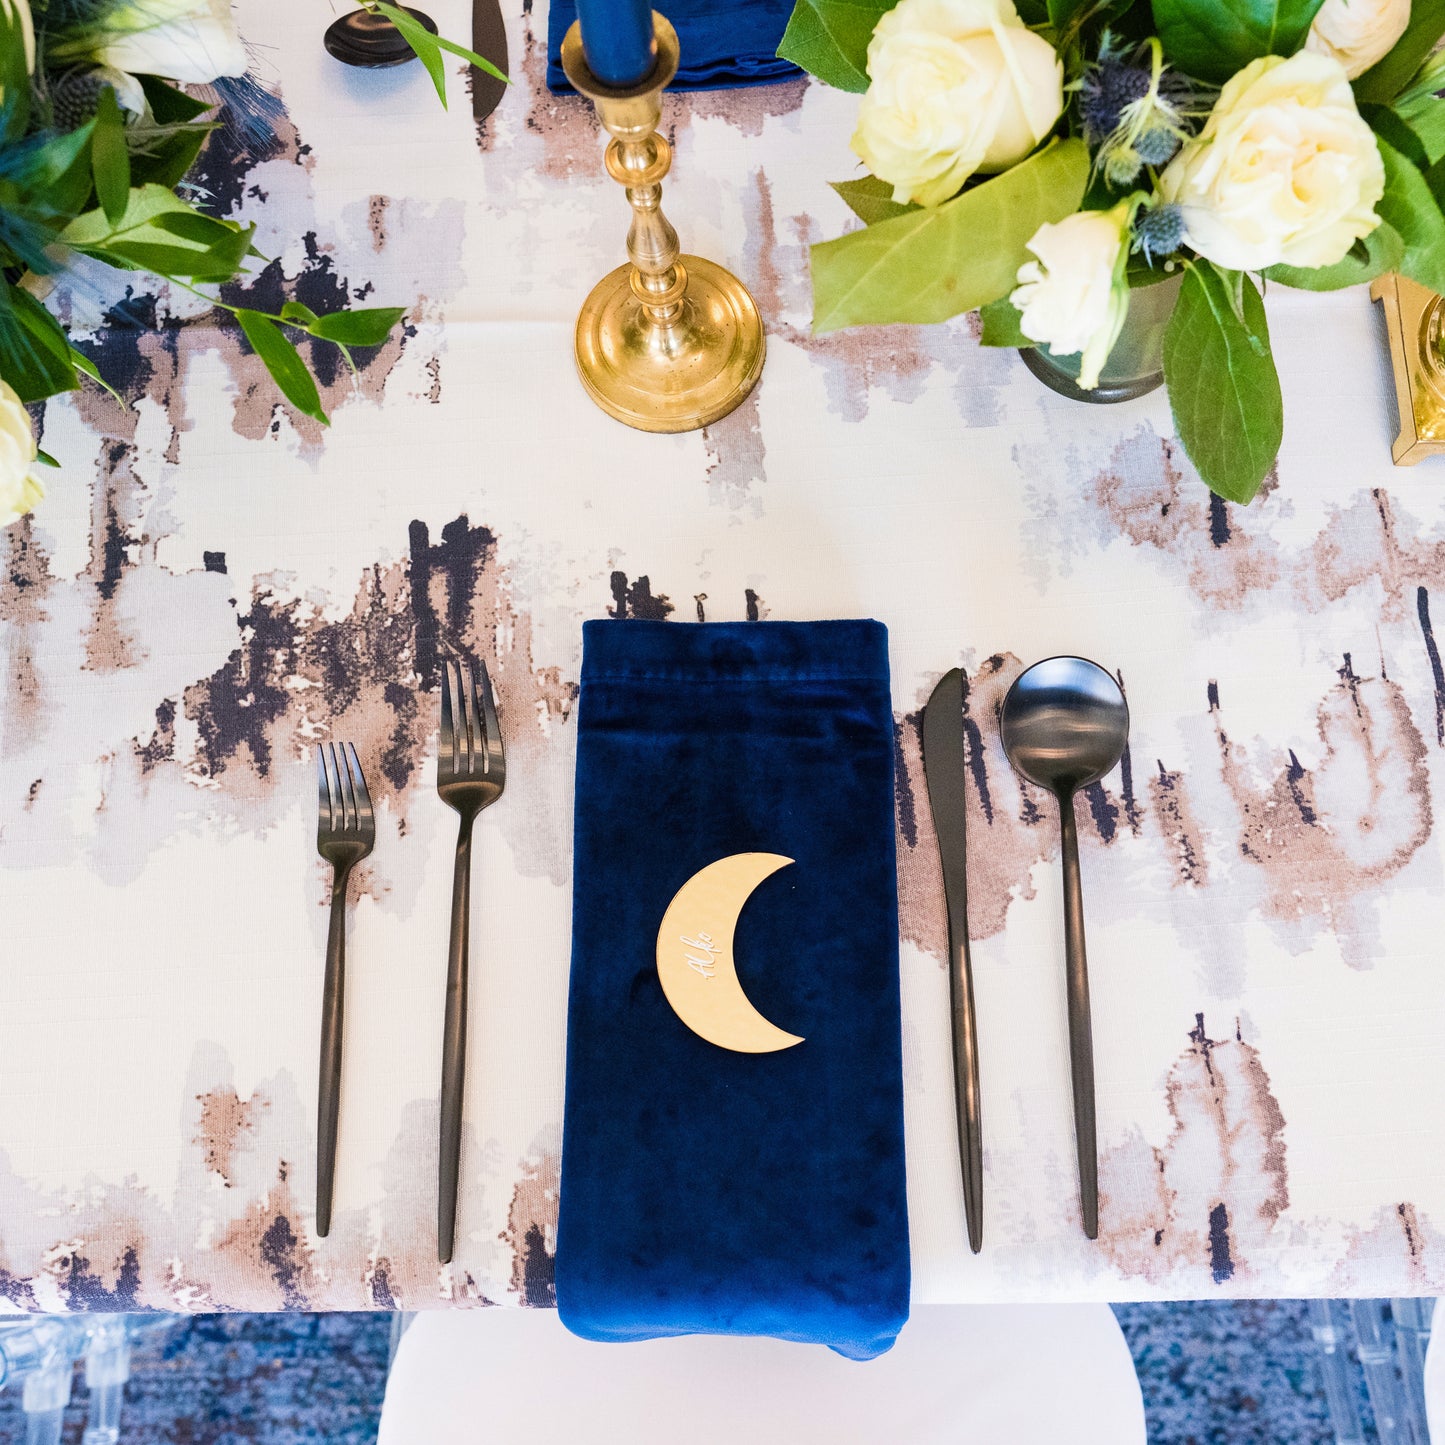 Moon Shaped Place Cards